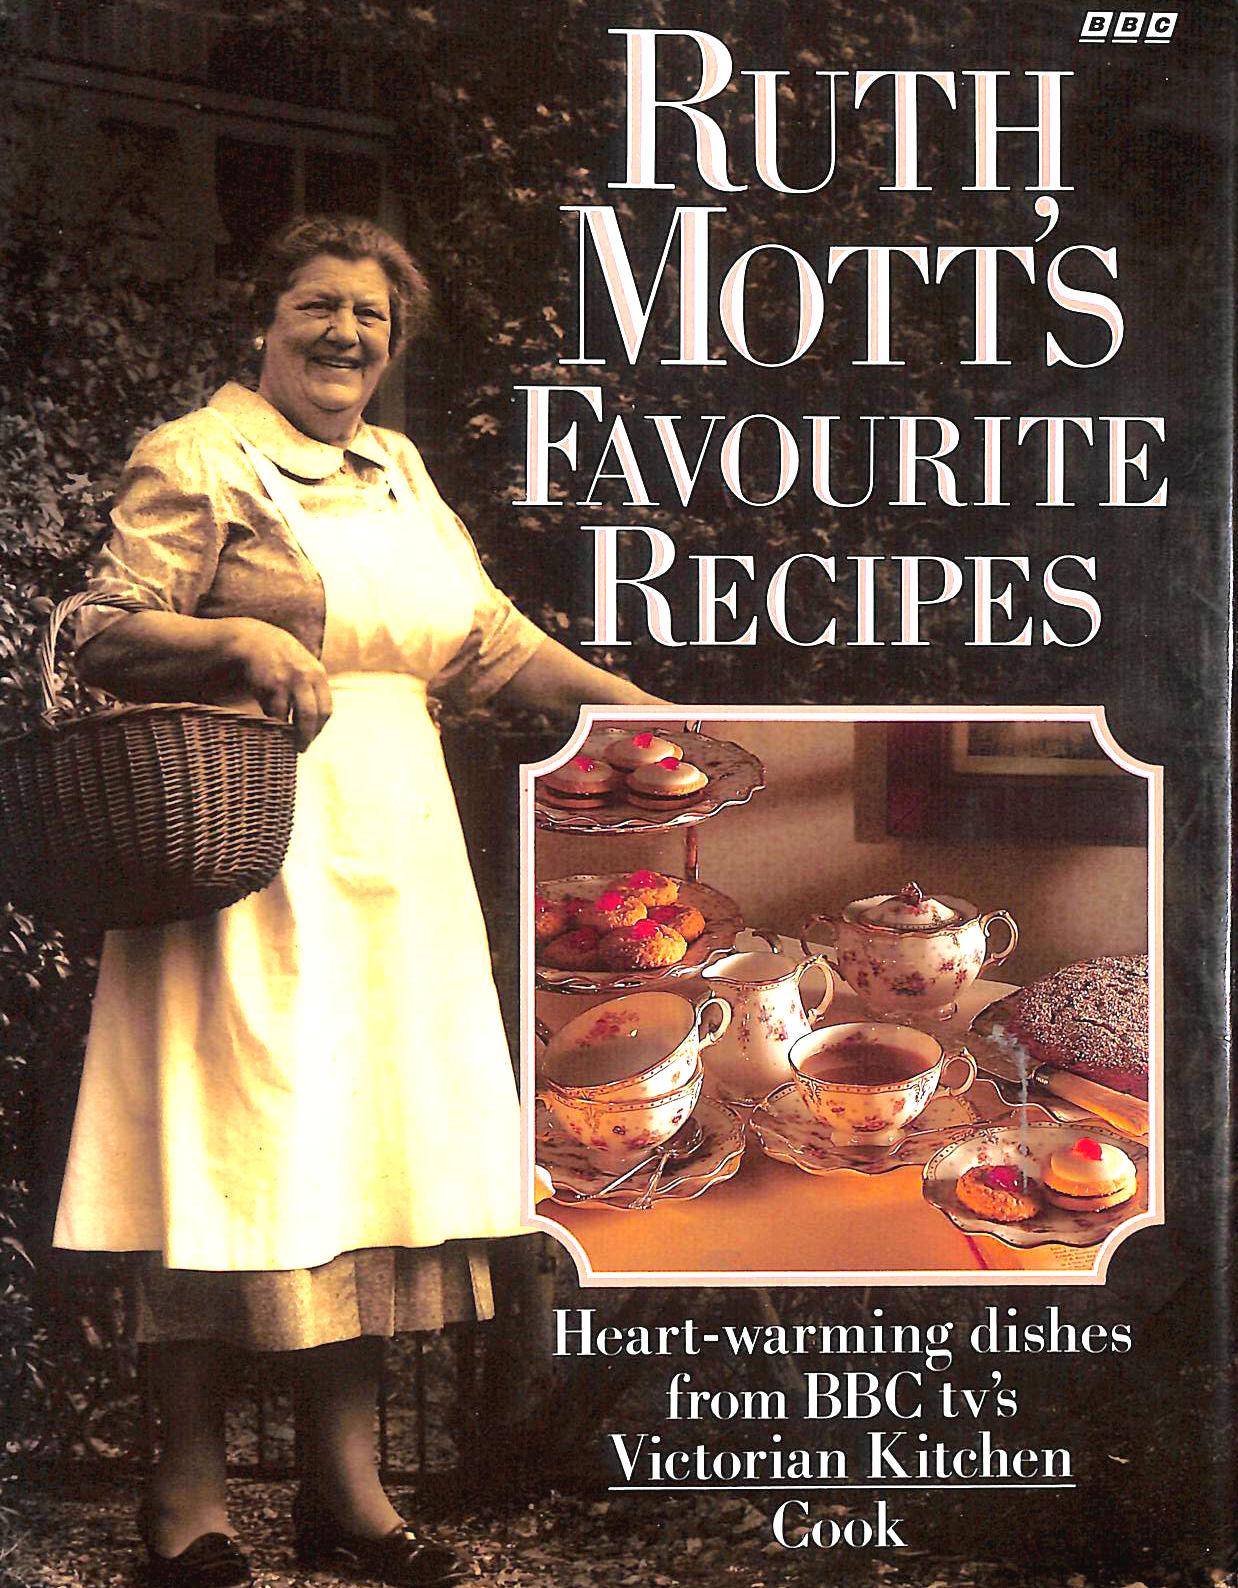 RUTH MOTT; WENDY HOBSON [COLLABORATOR] - Ruth Mott's Favourite Recipes: Heart-warming dishes from BBC tv's Victorian Kitchen Cook